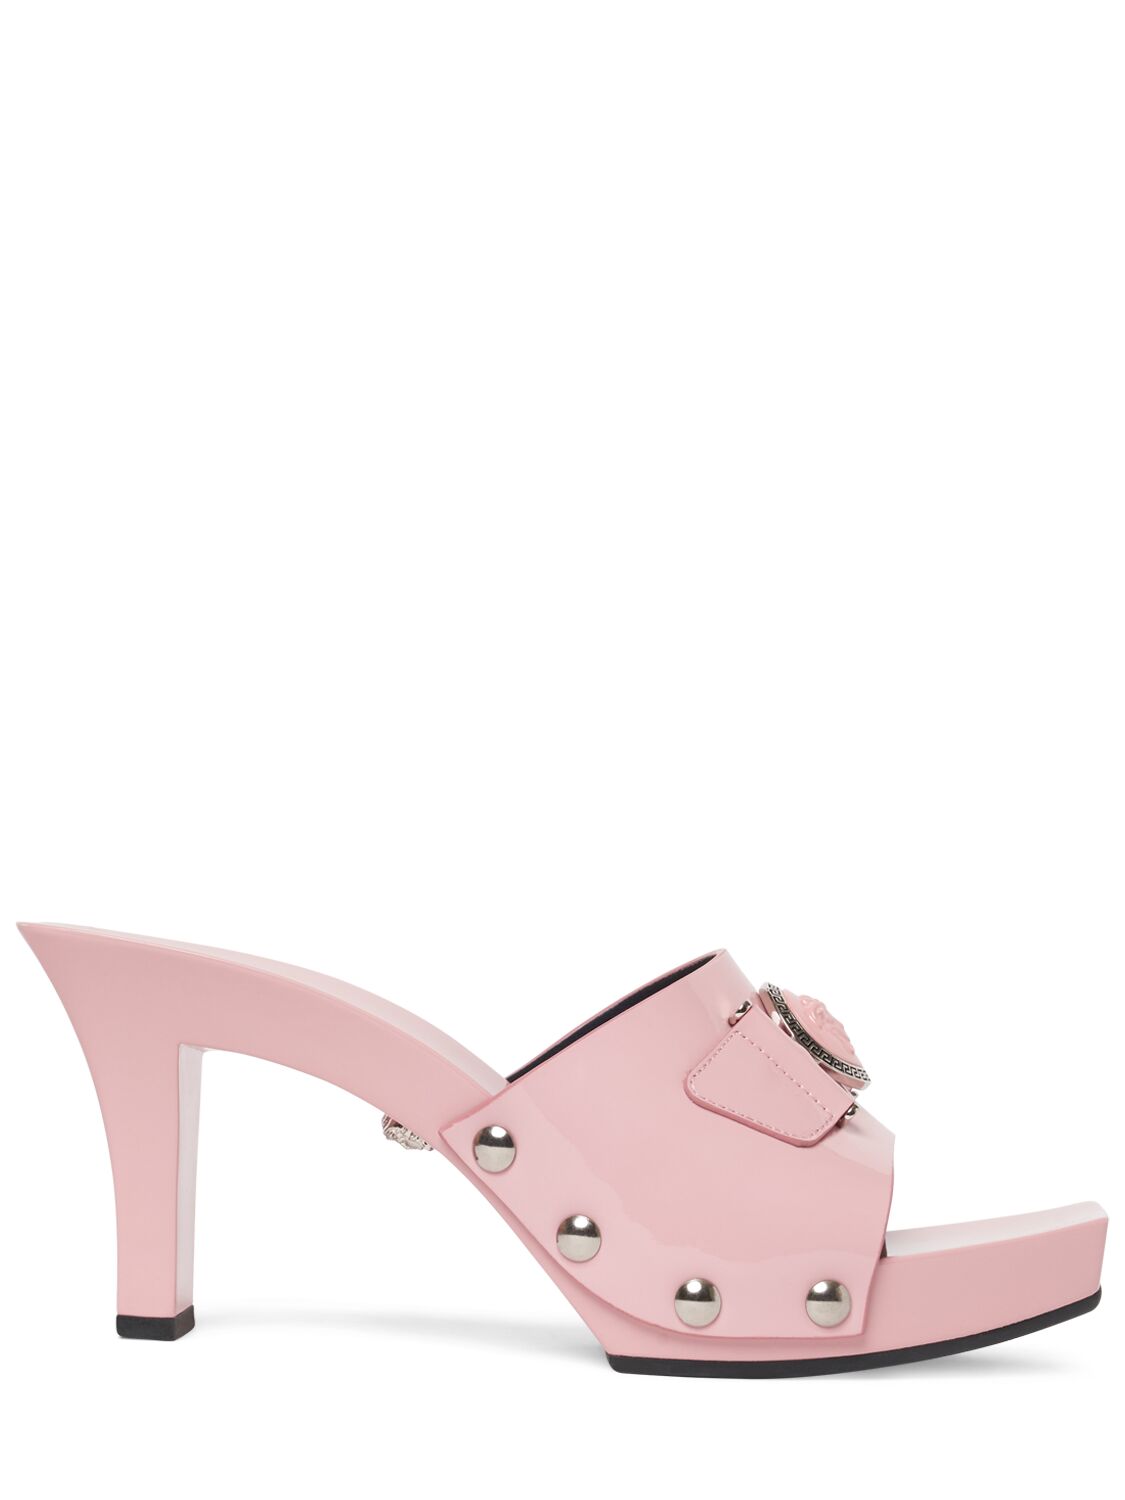 Versace 60mm Patent Leather Clogs In Light Pink